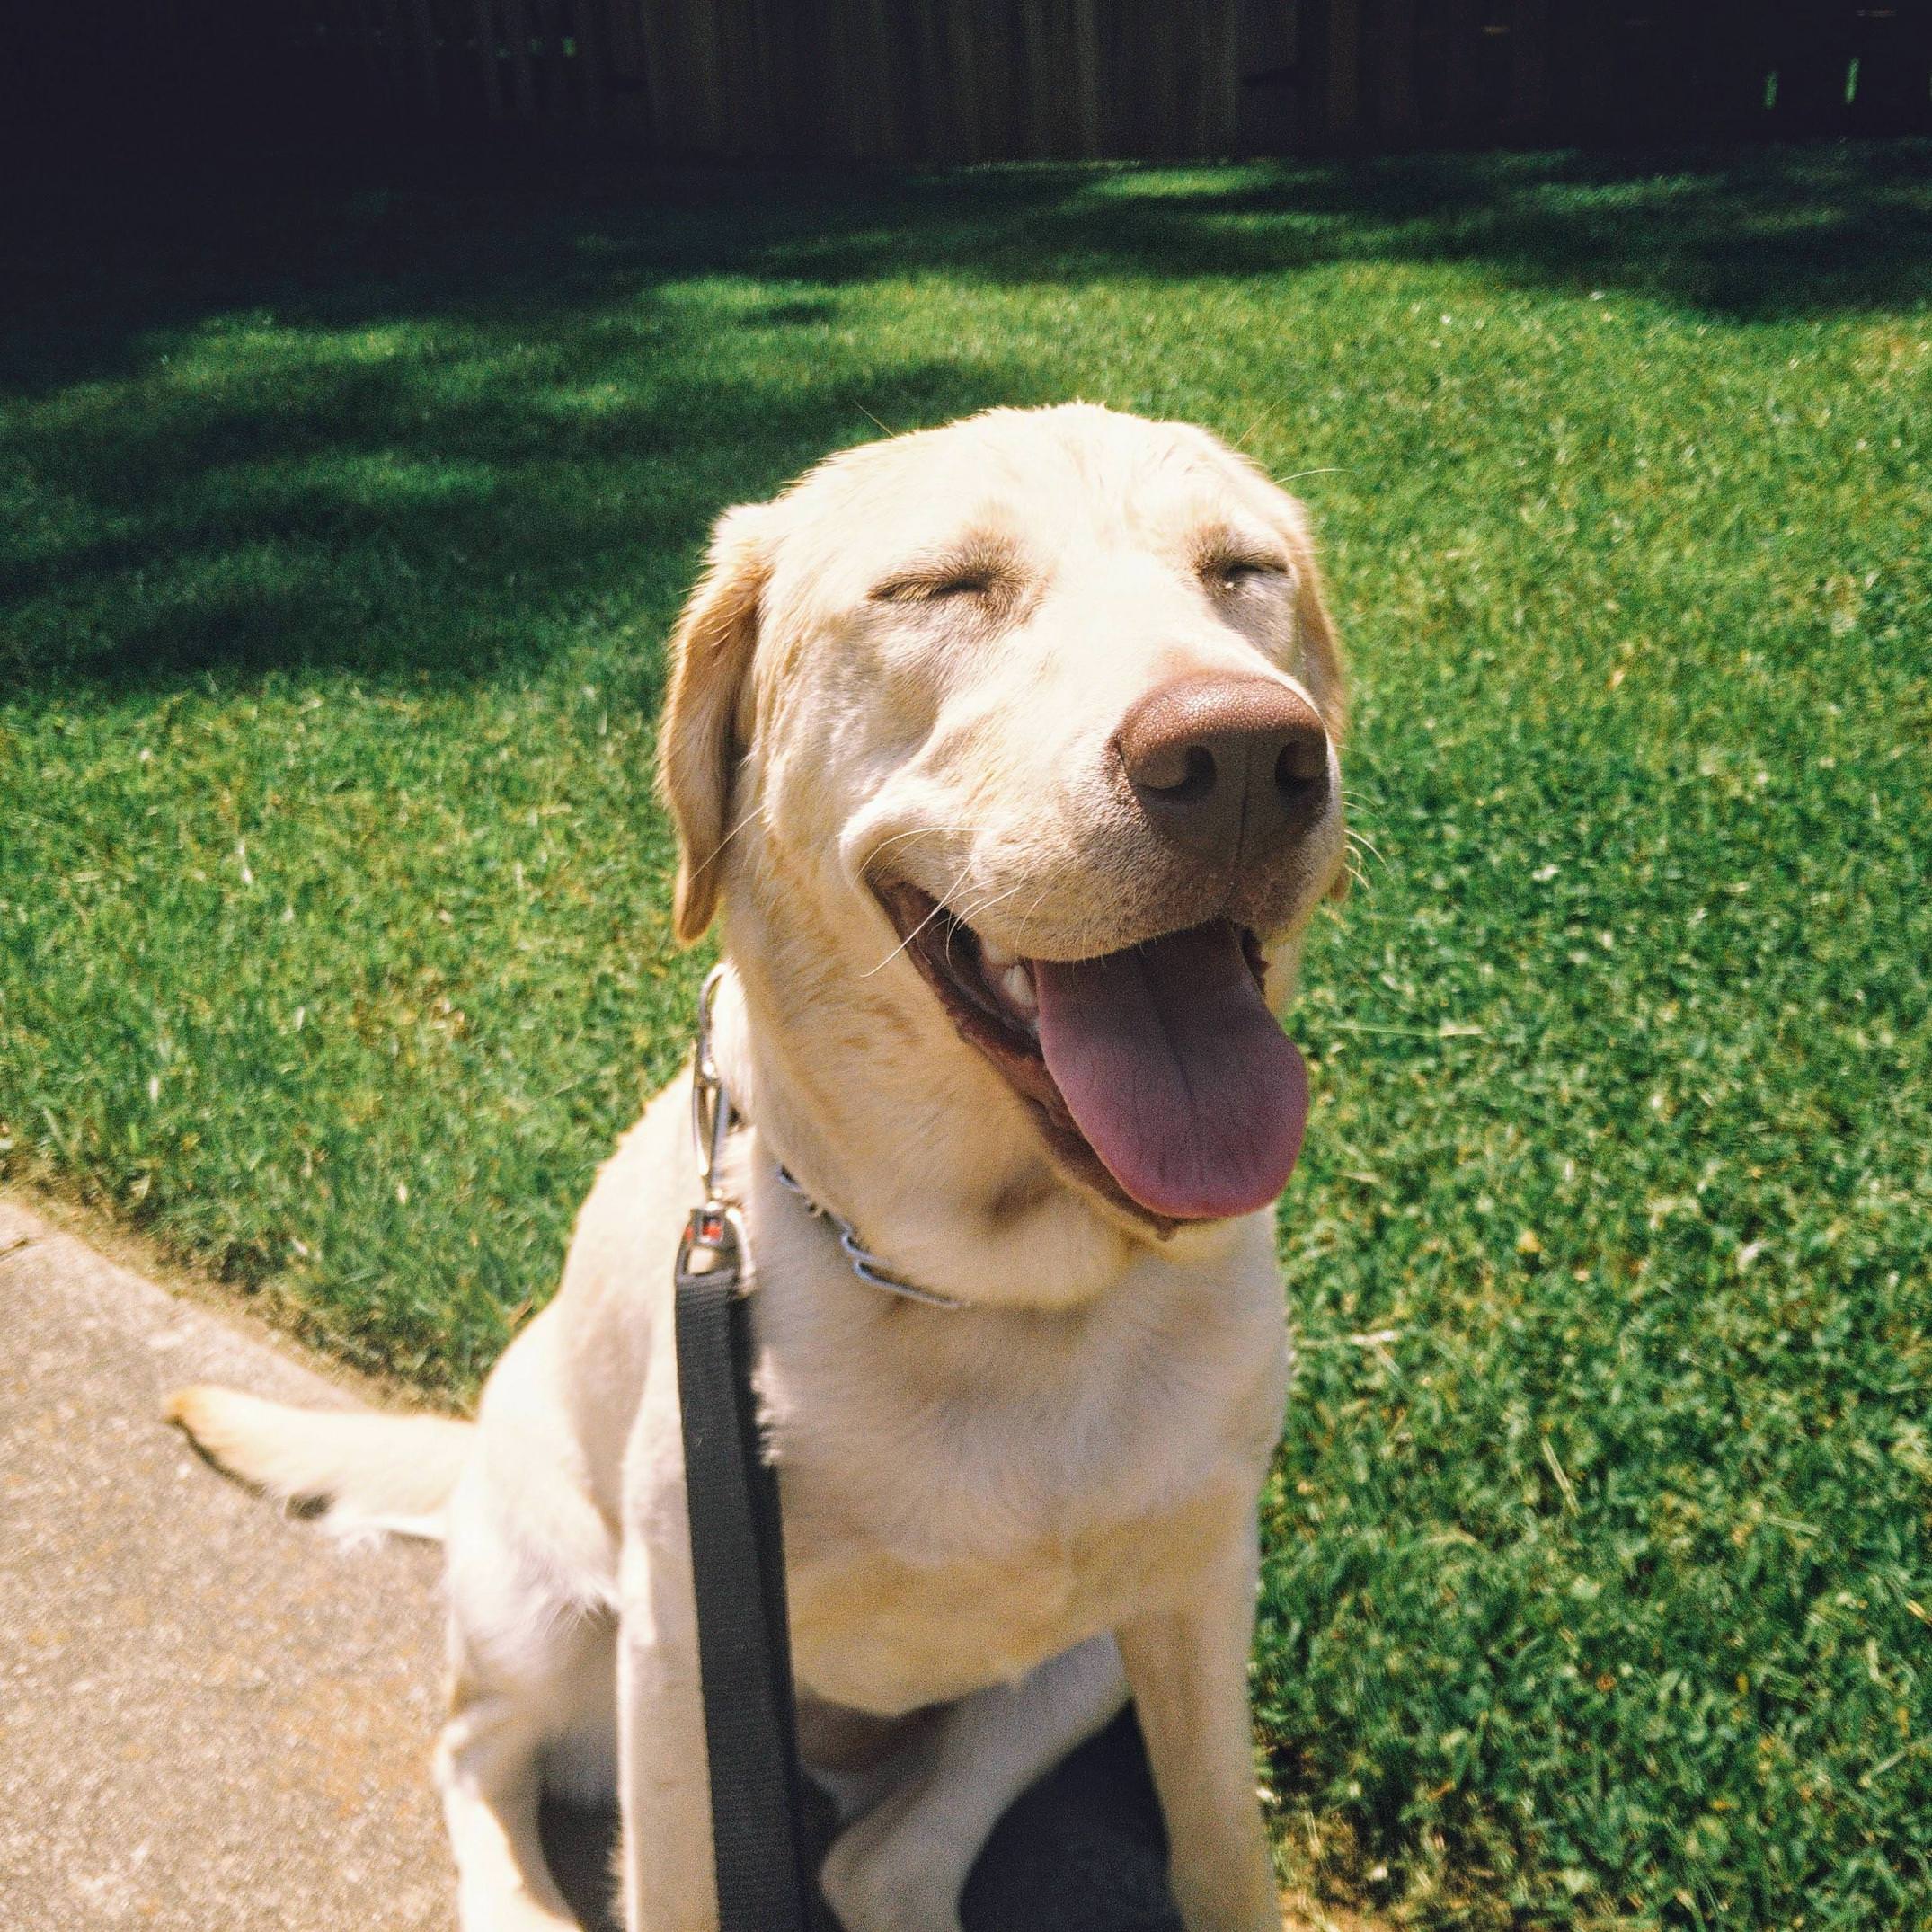 A yellow Labrador sitting in the yard while smiling with its eyes close under the sun